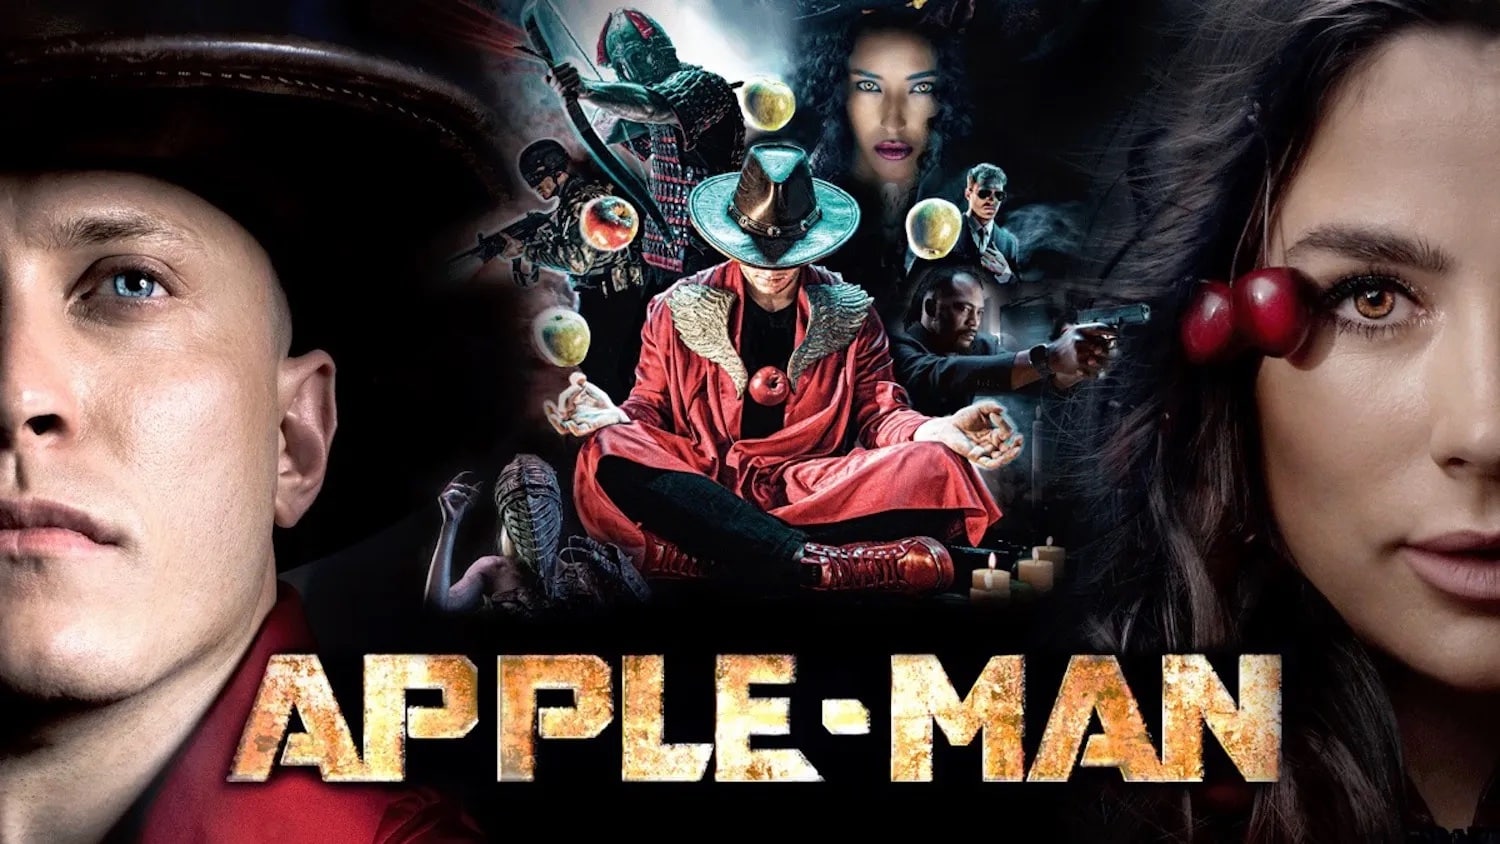 The movie is a super-hero satire about a guy who can levitate apples (the fruit).